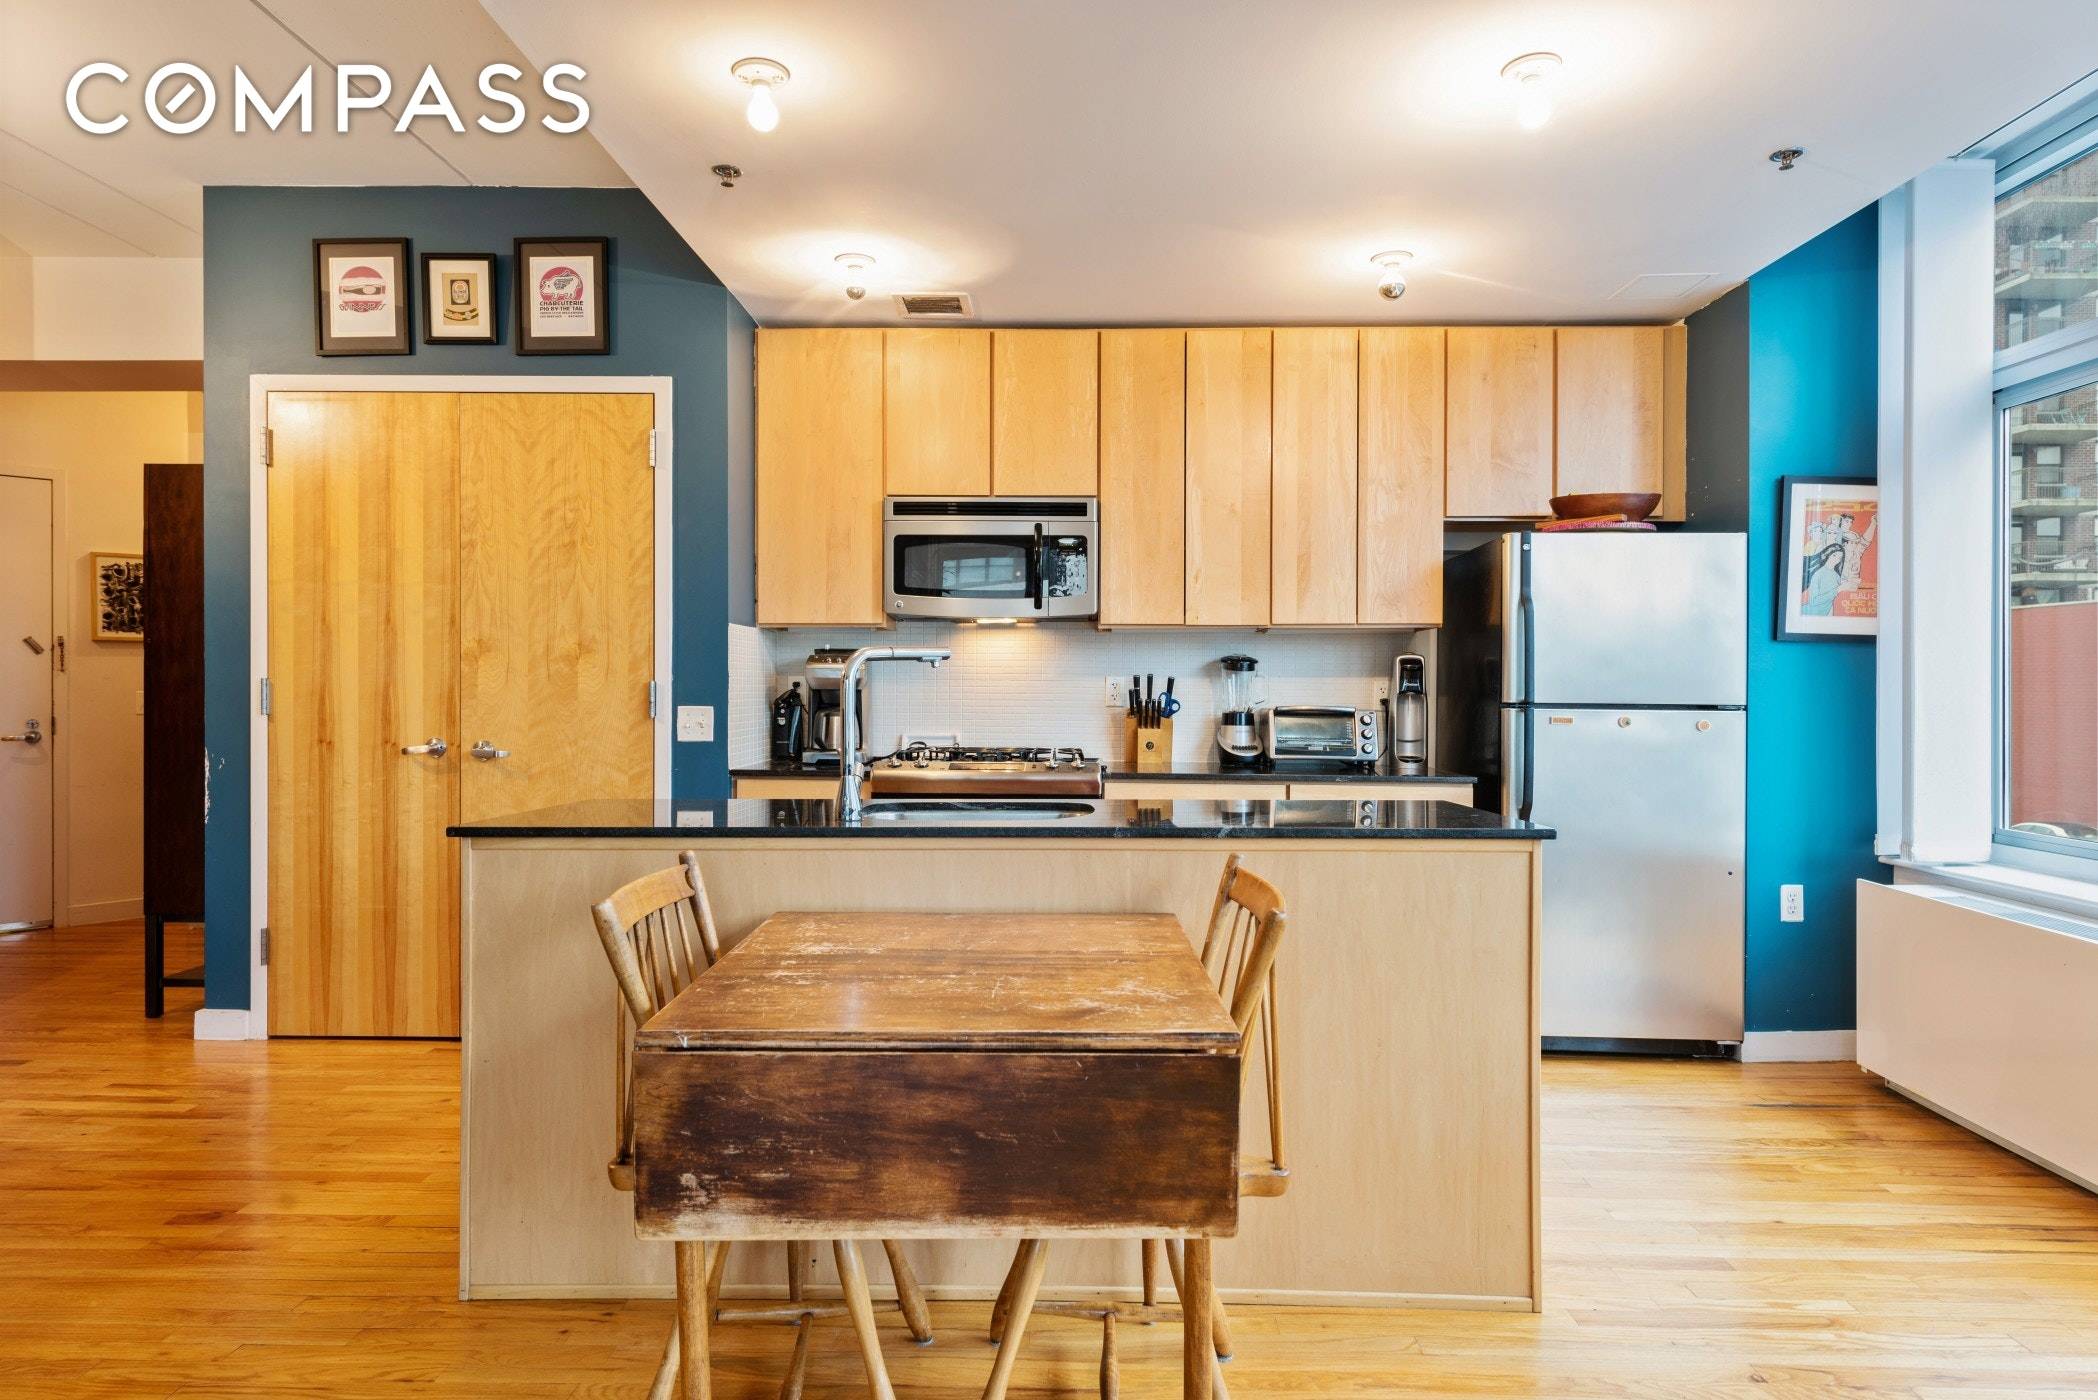 Right in the center of one of Brooklyn's most trendy neighborhoods, this 2 bedroom 2 bath is a light filled gem.